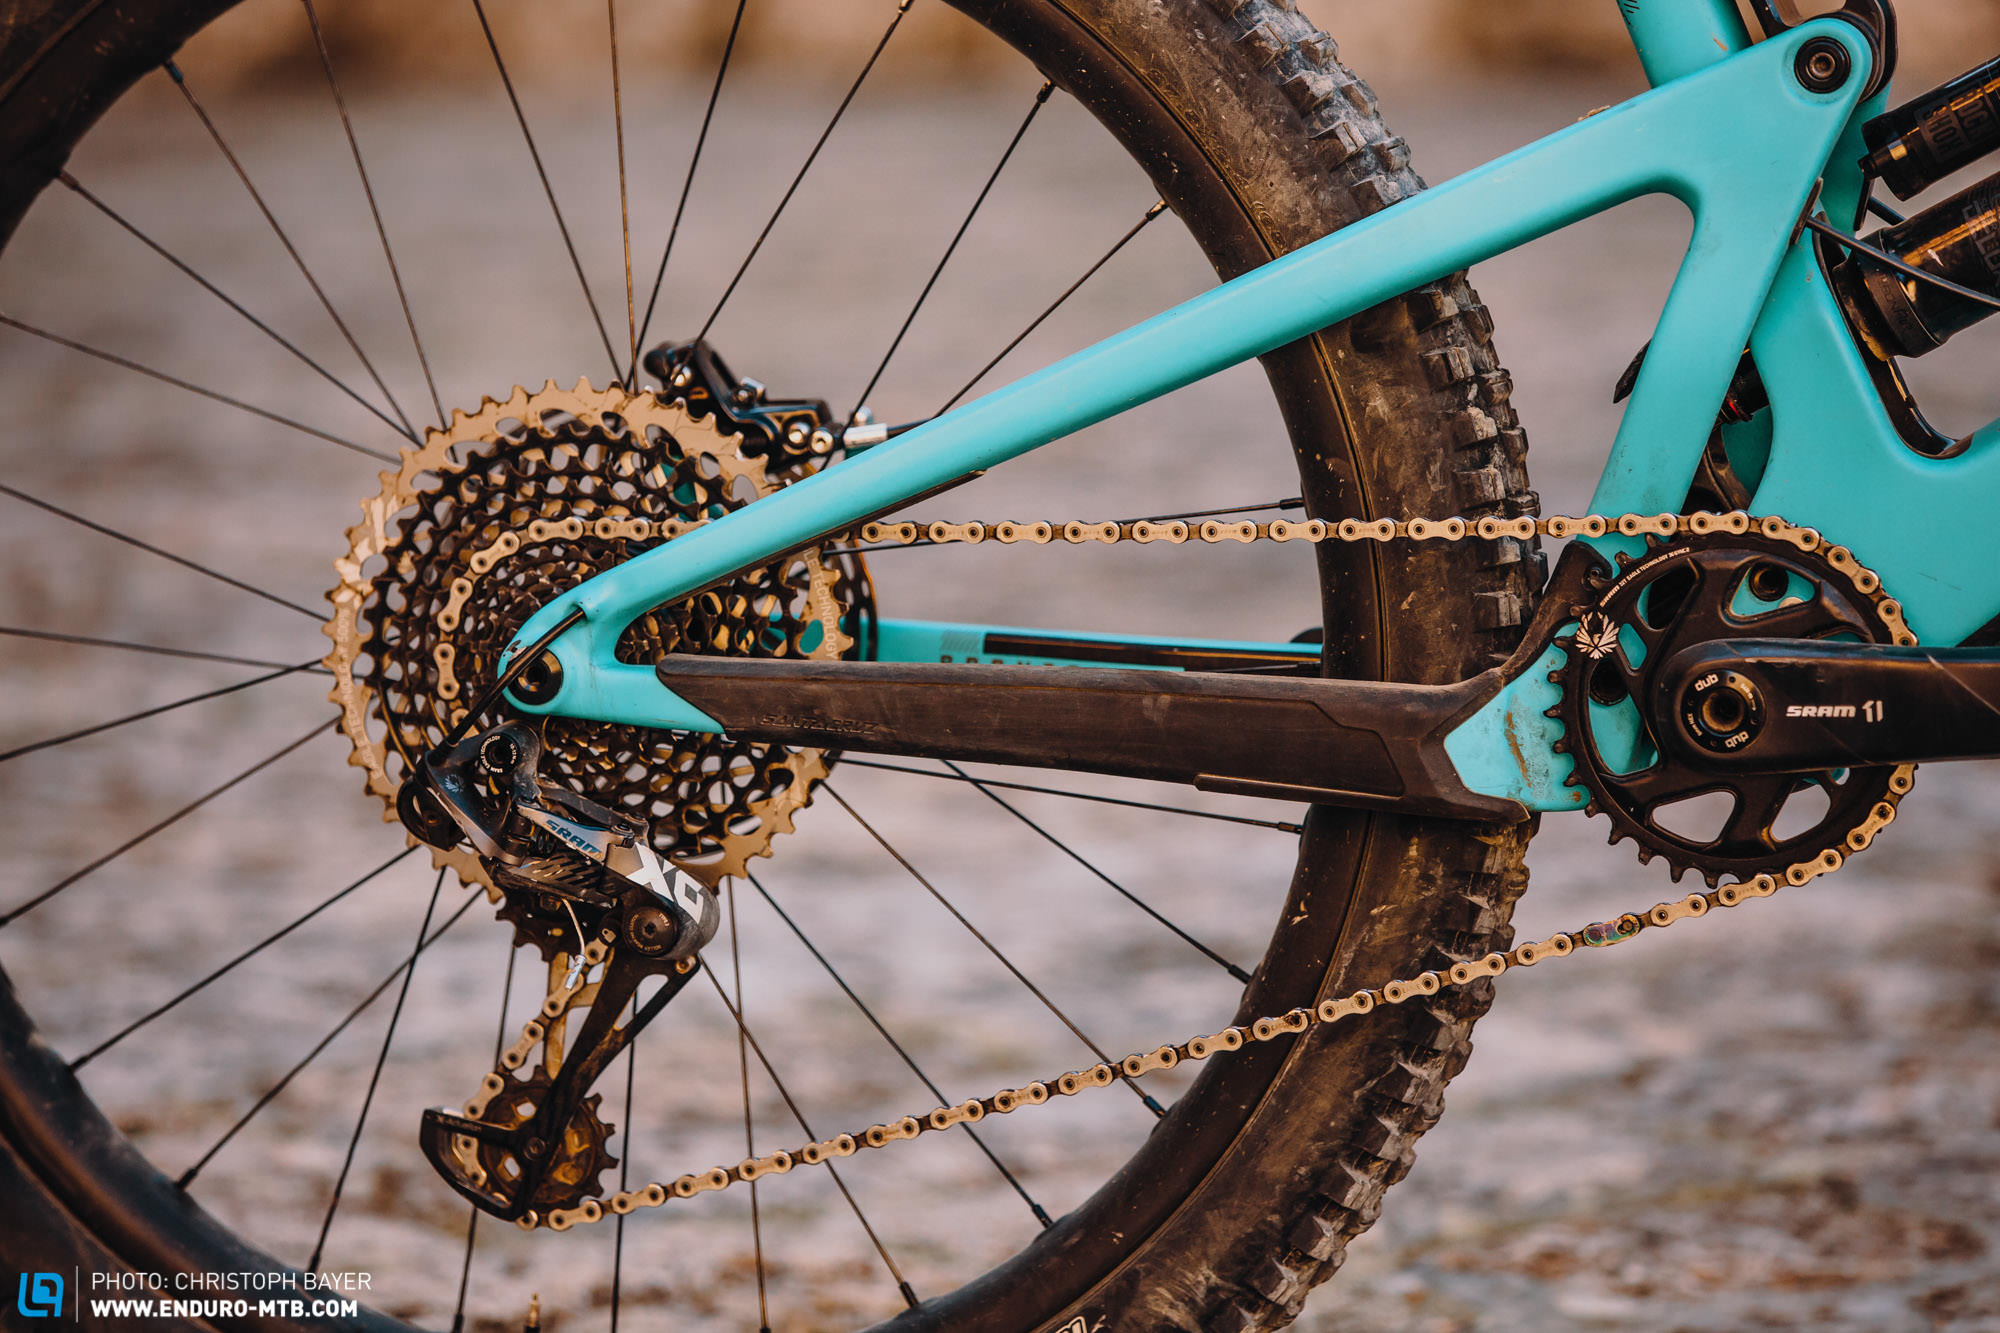 Mountain bike gears explained, How MTB gears work and how to use them